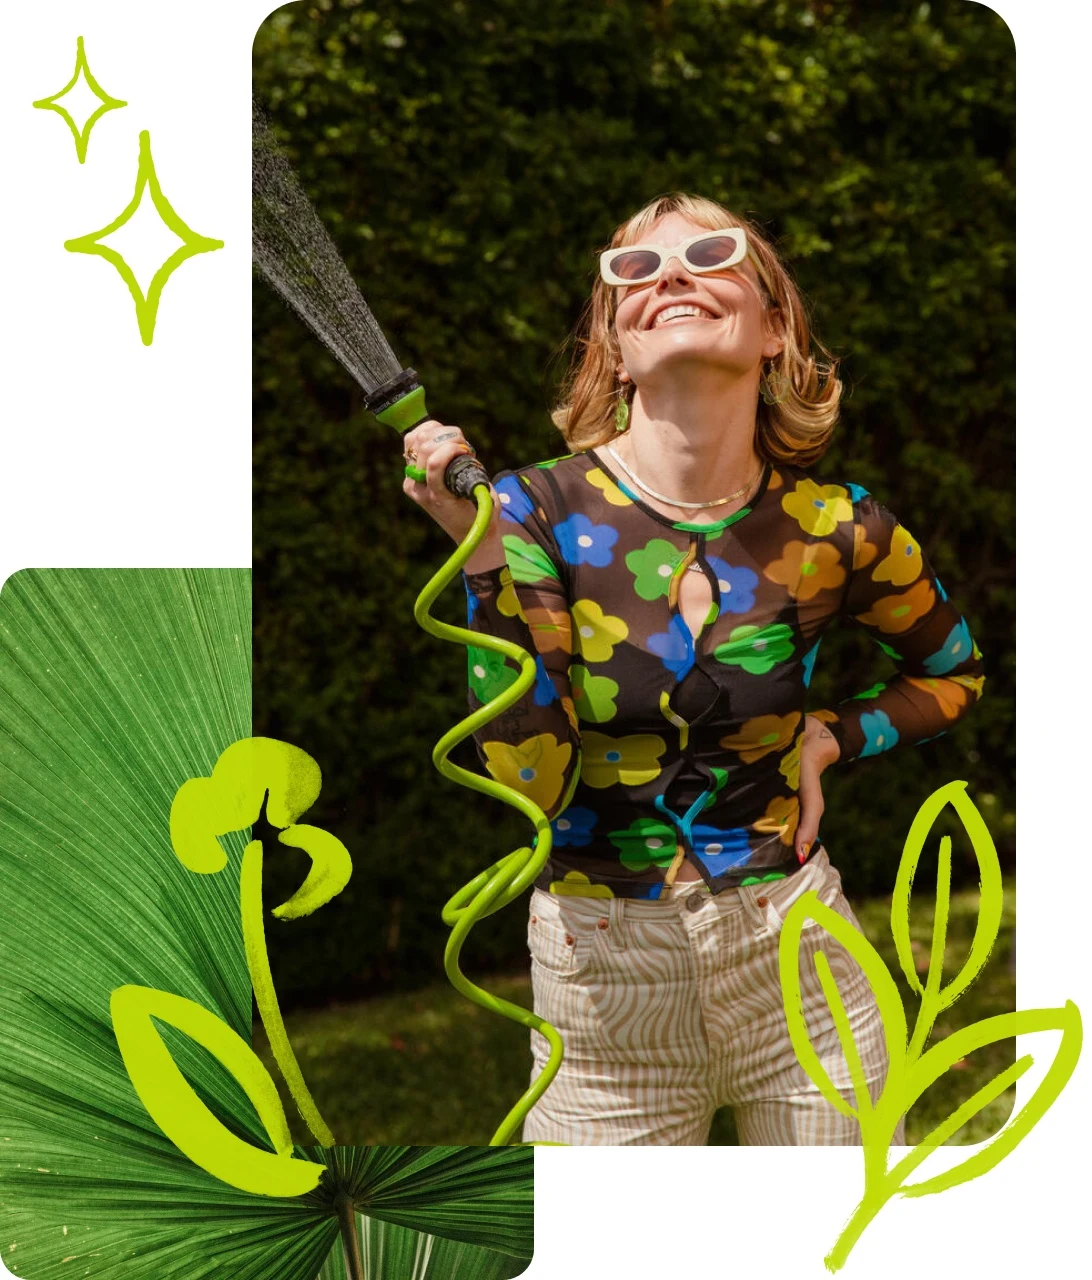 Pin collage of smiling woman wearing sunglasses and colorful shirt holding garden hose